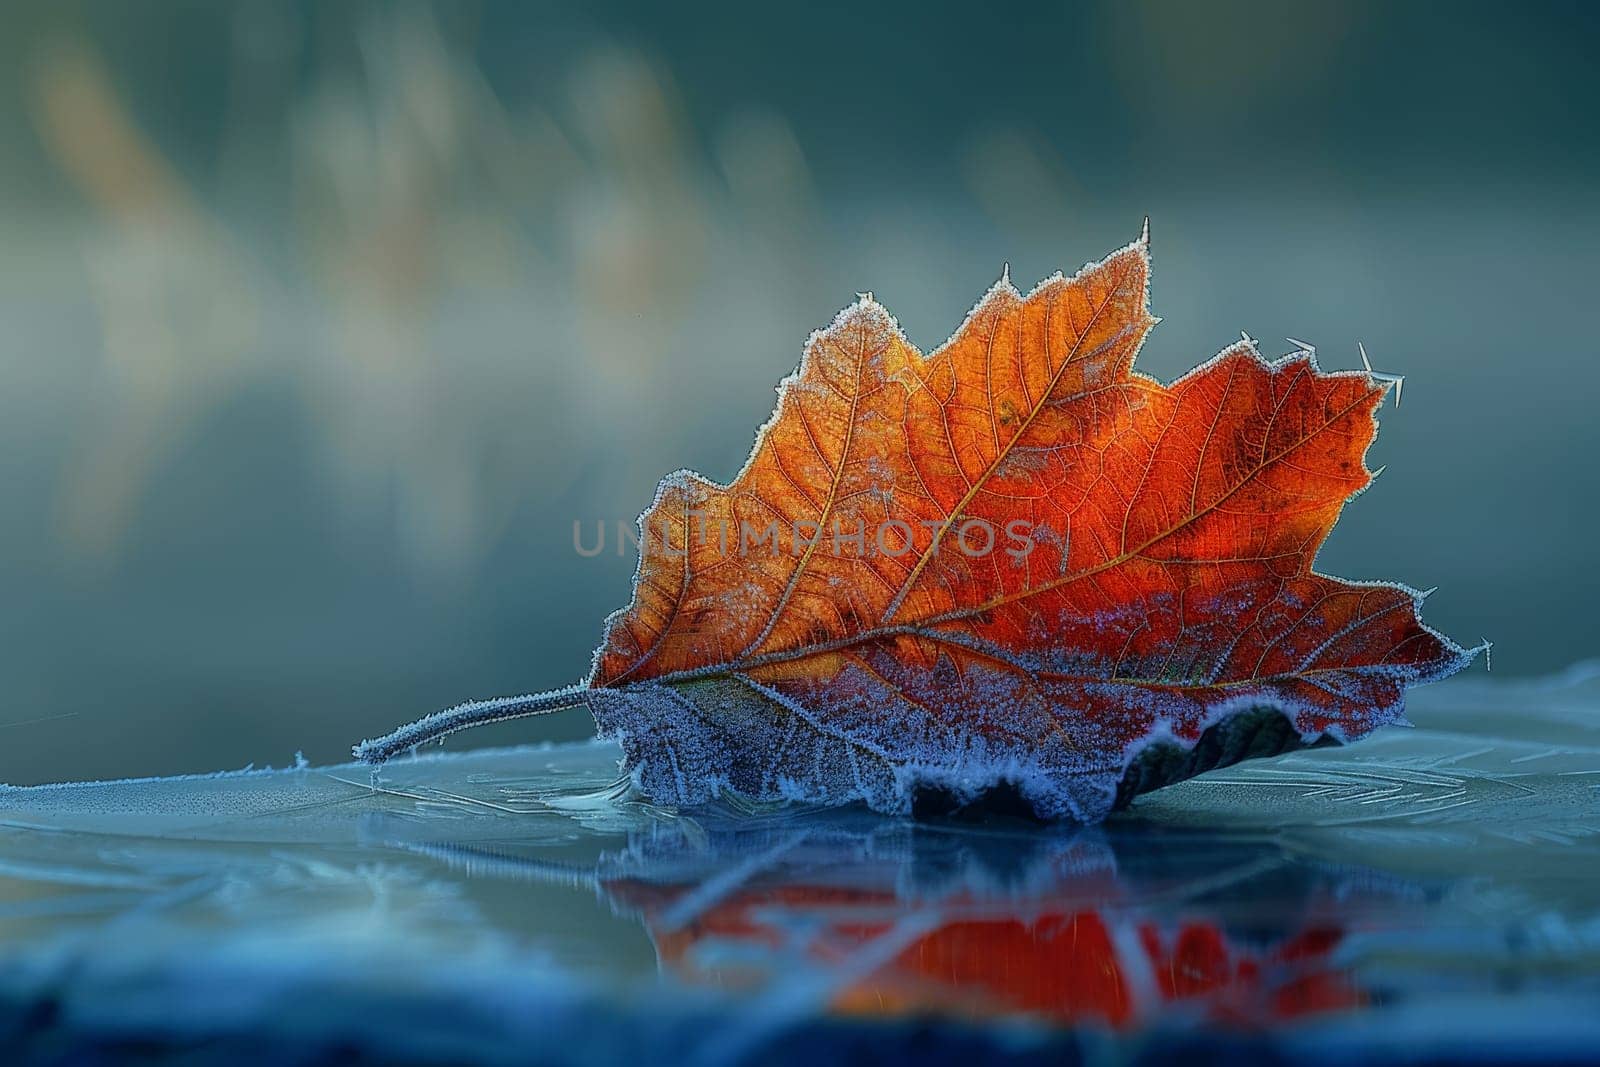 Frosty Morning on maple Leaf with frost in late autumn or early winter. Generated AI..